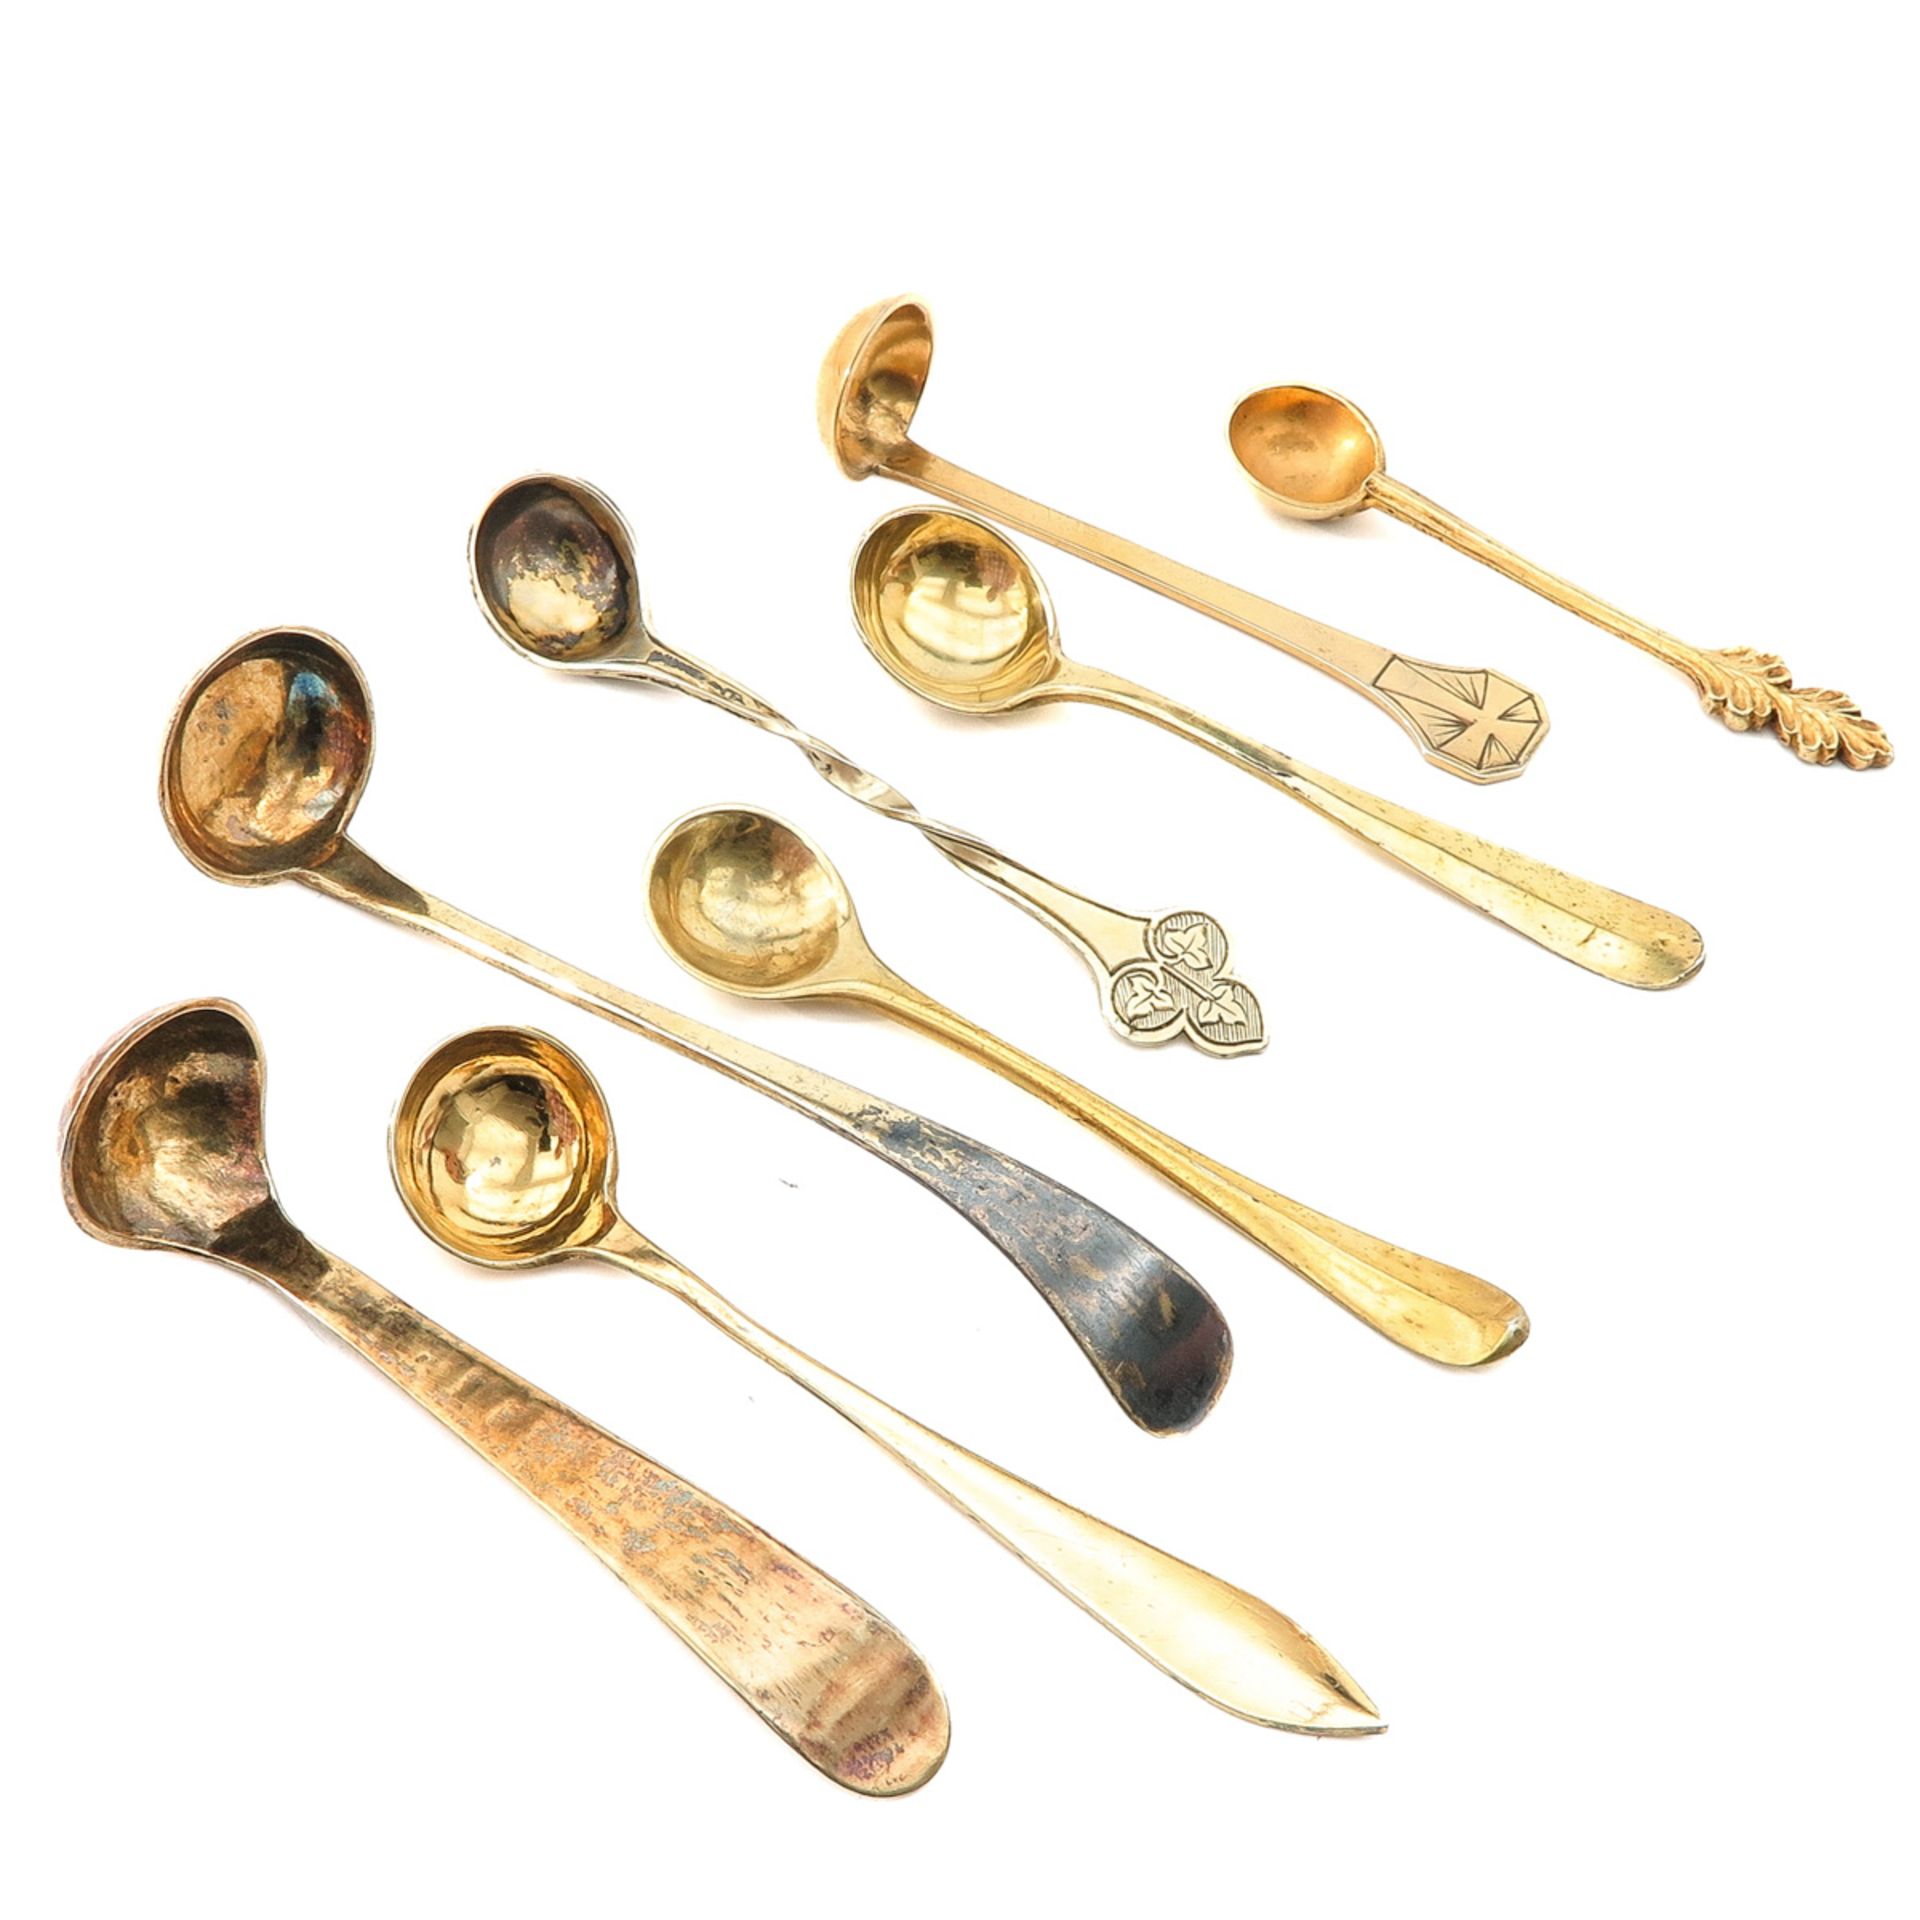 A Collection of 8 Religious Silver Spoons